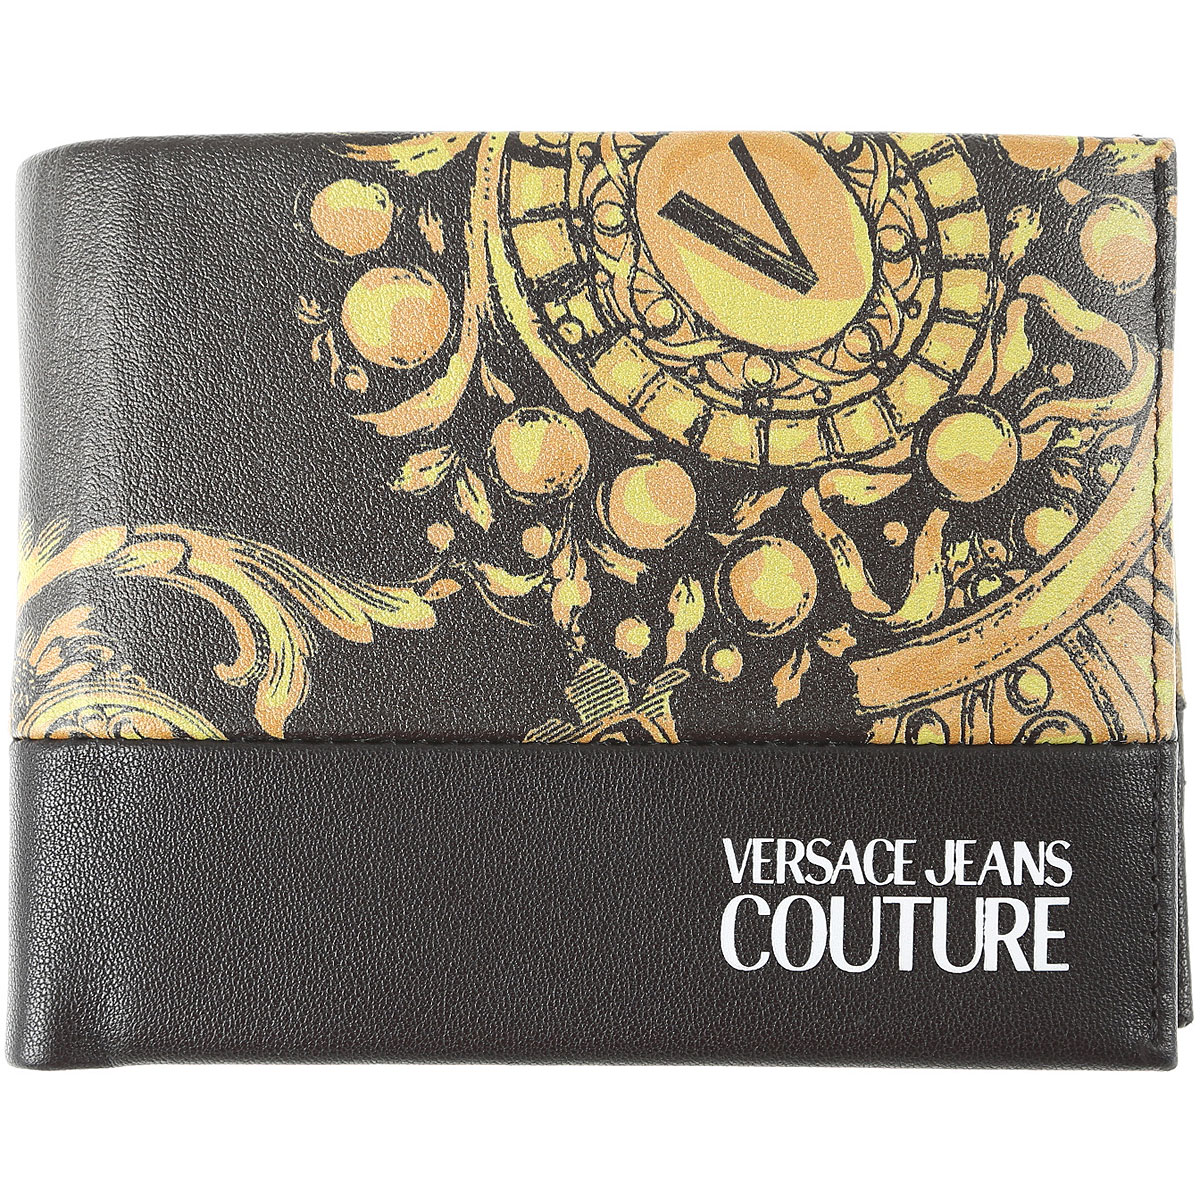 Mens Wallets Versace Jeans Couture , Style code: 71ya5pb1-zs119-g89